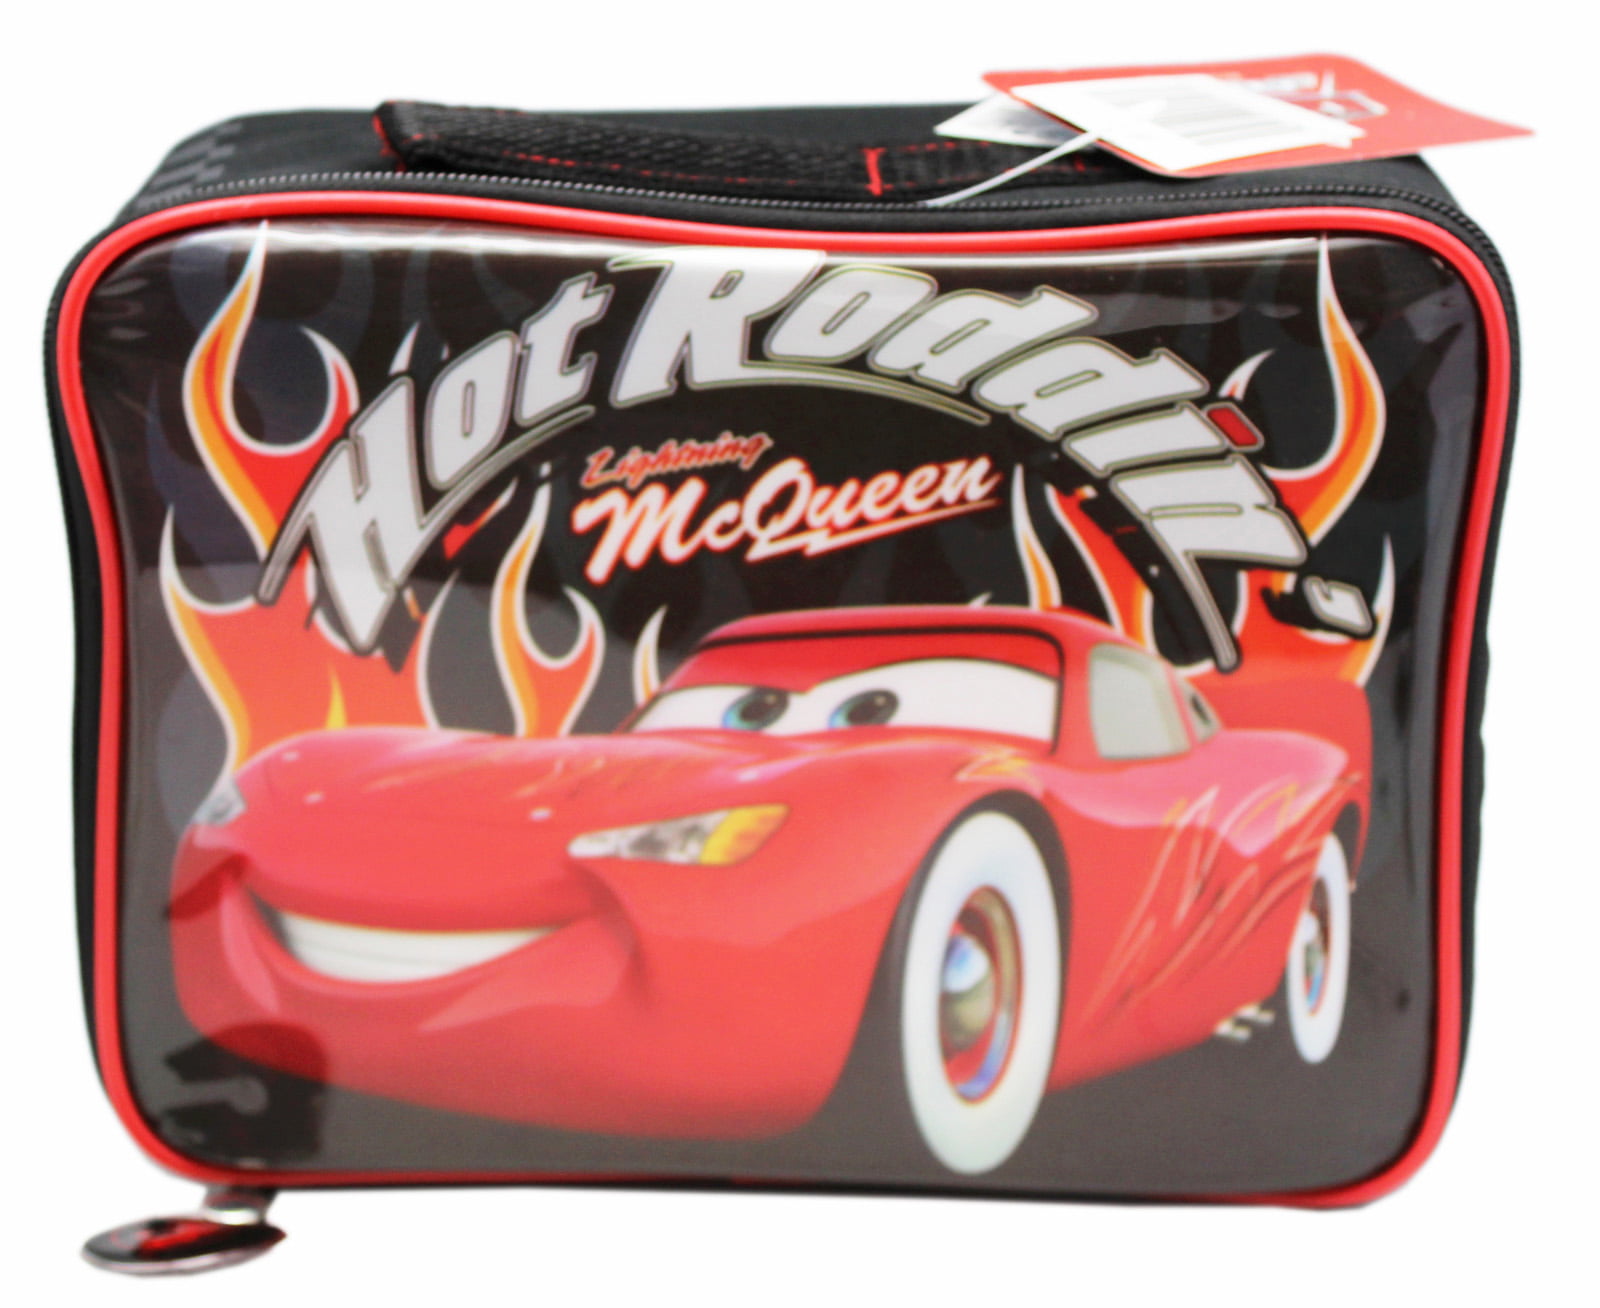 DISNEY CARS 3 McQUEEN Lead-Free Dual-Chamber Insulated Lunch Box Tote Bag  $22 